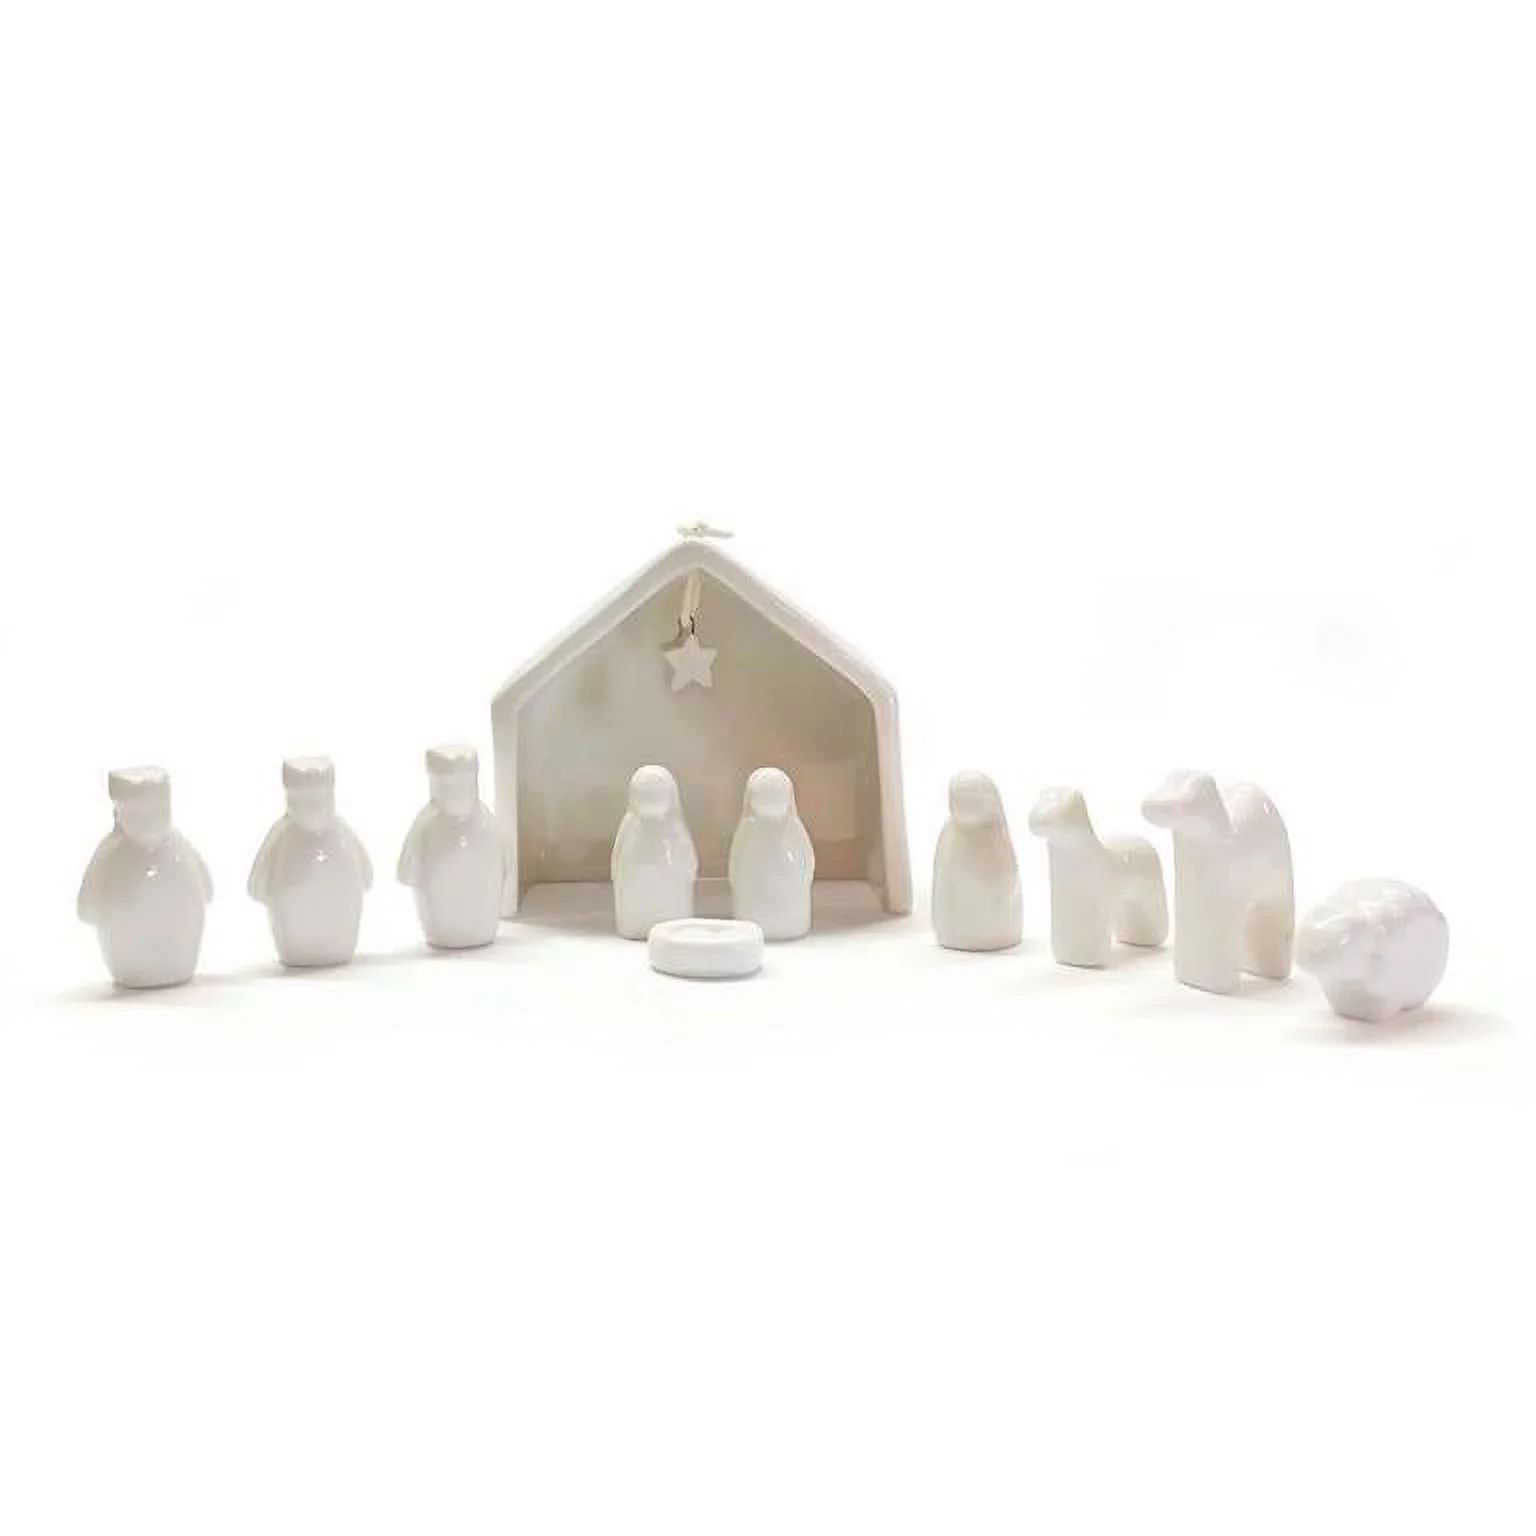 Two's Company 11 Pieces Miniature Nativity Set In Gift Box | Walmart (US)